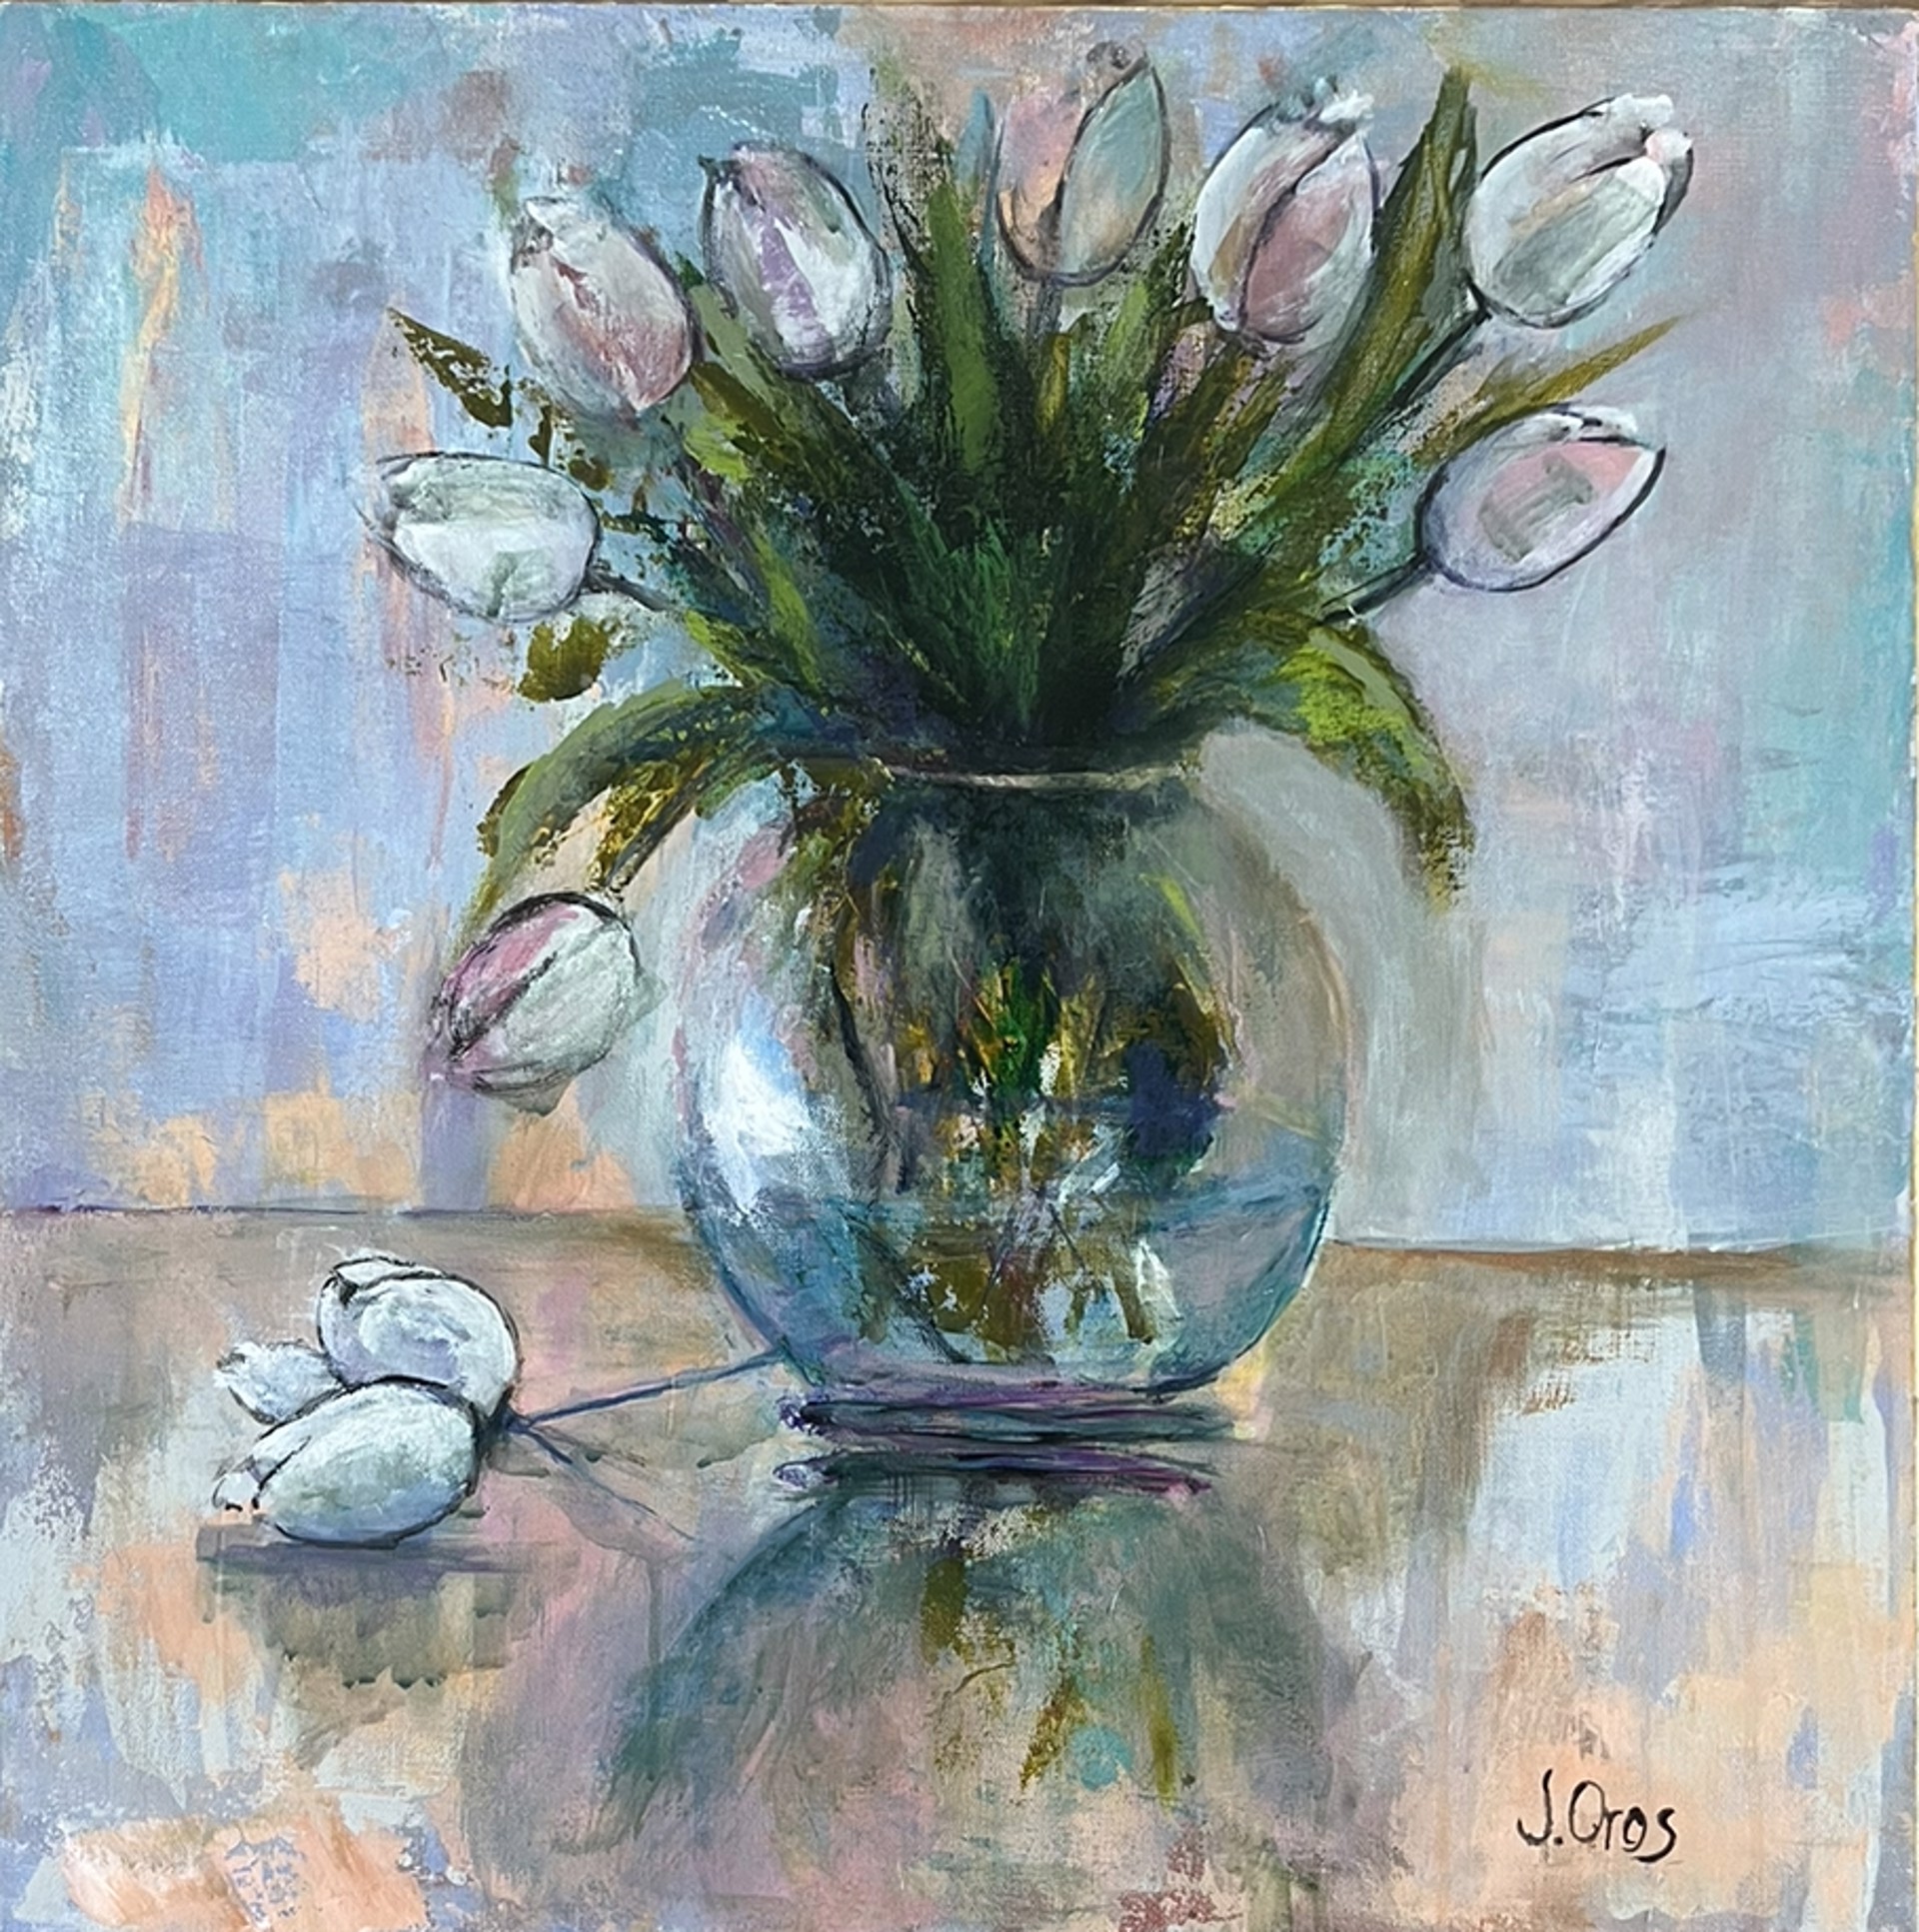 Tulips, Always, Always See the Light by June Oros